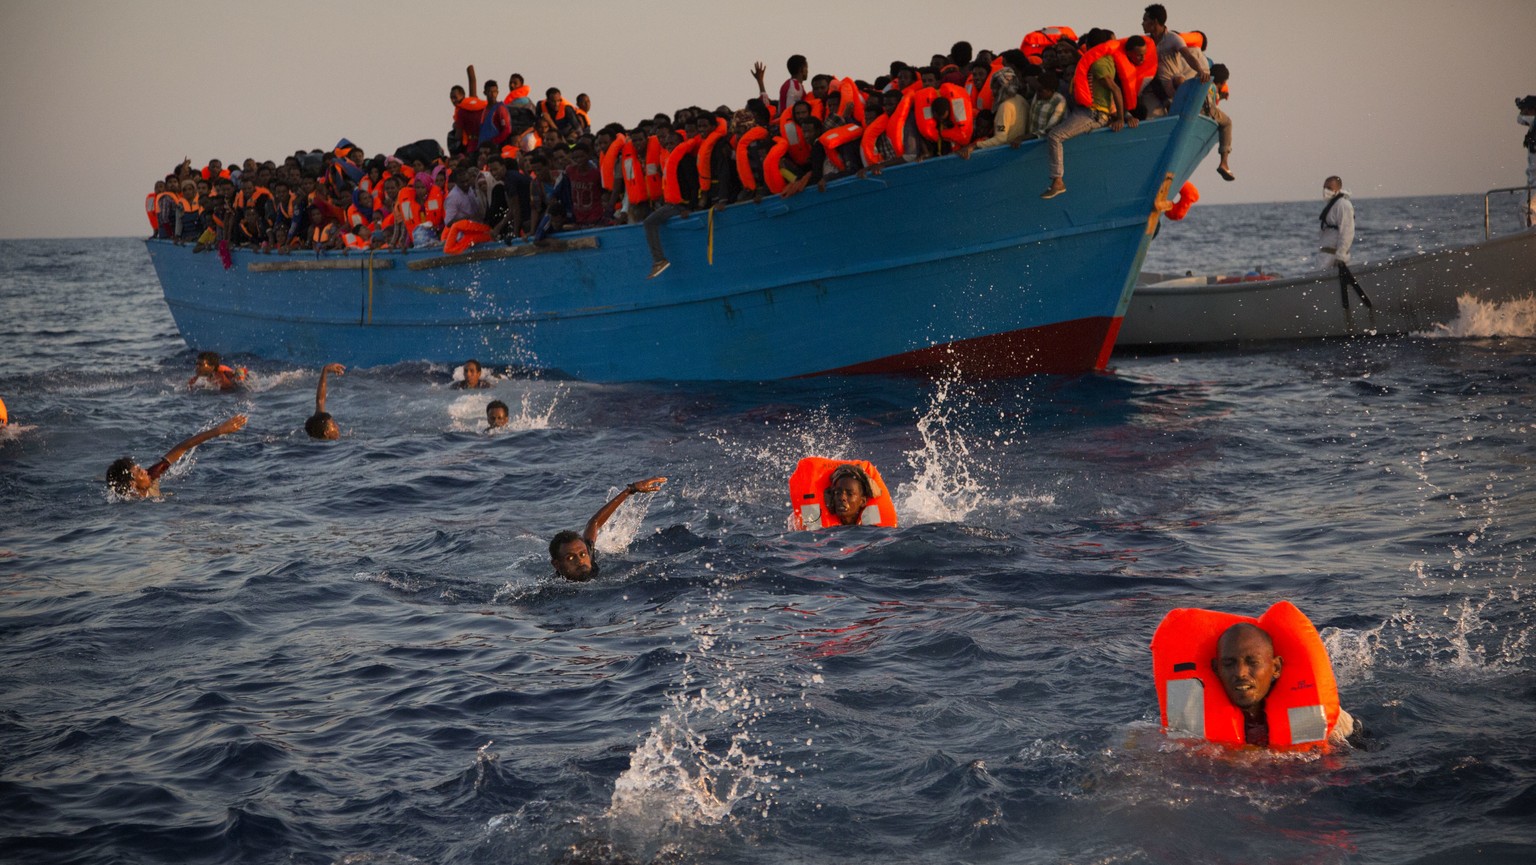 FILE - In this Monday, Aug. 29, 2016 file photo, men jumps onto the water from a crowded wooden boat during a rescue operation, on the Mediterranean sea, about 13 miles north of Sabratha, Libya. When  ...